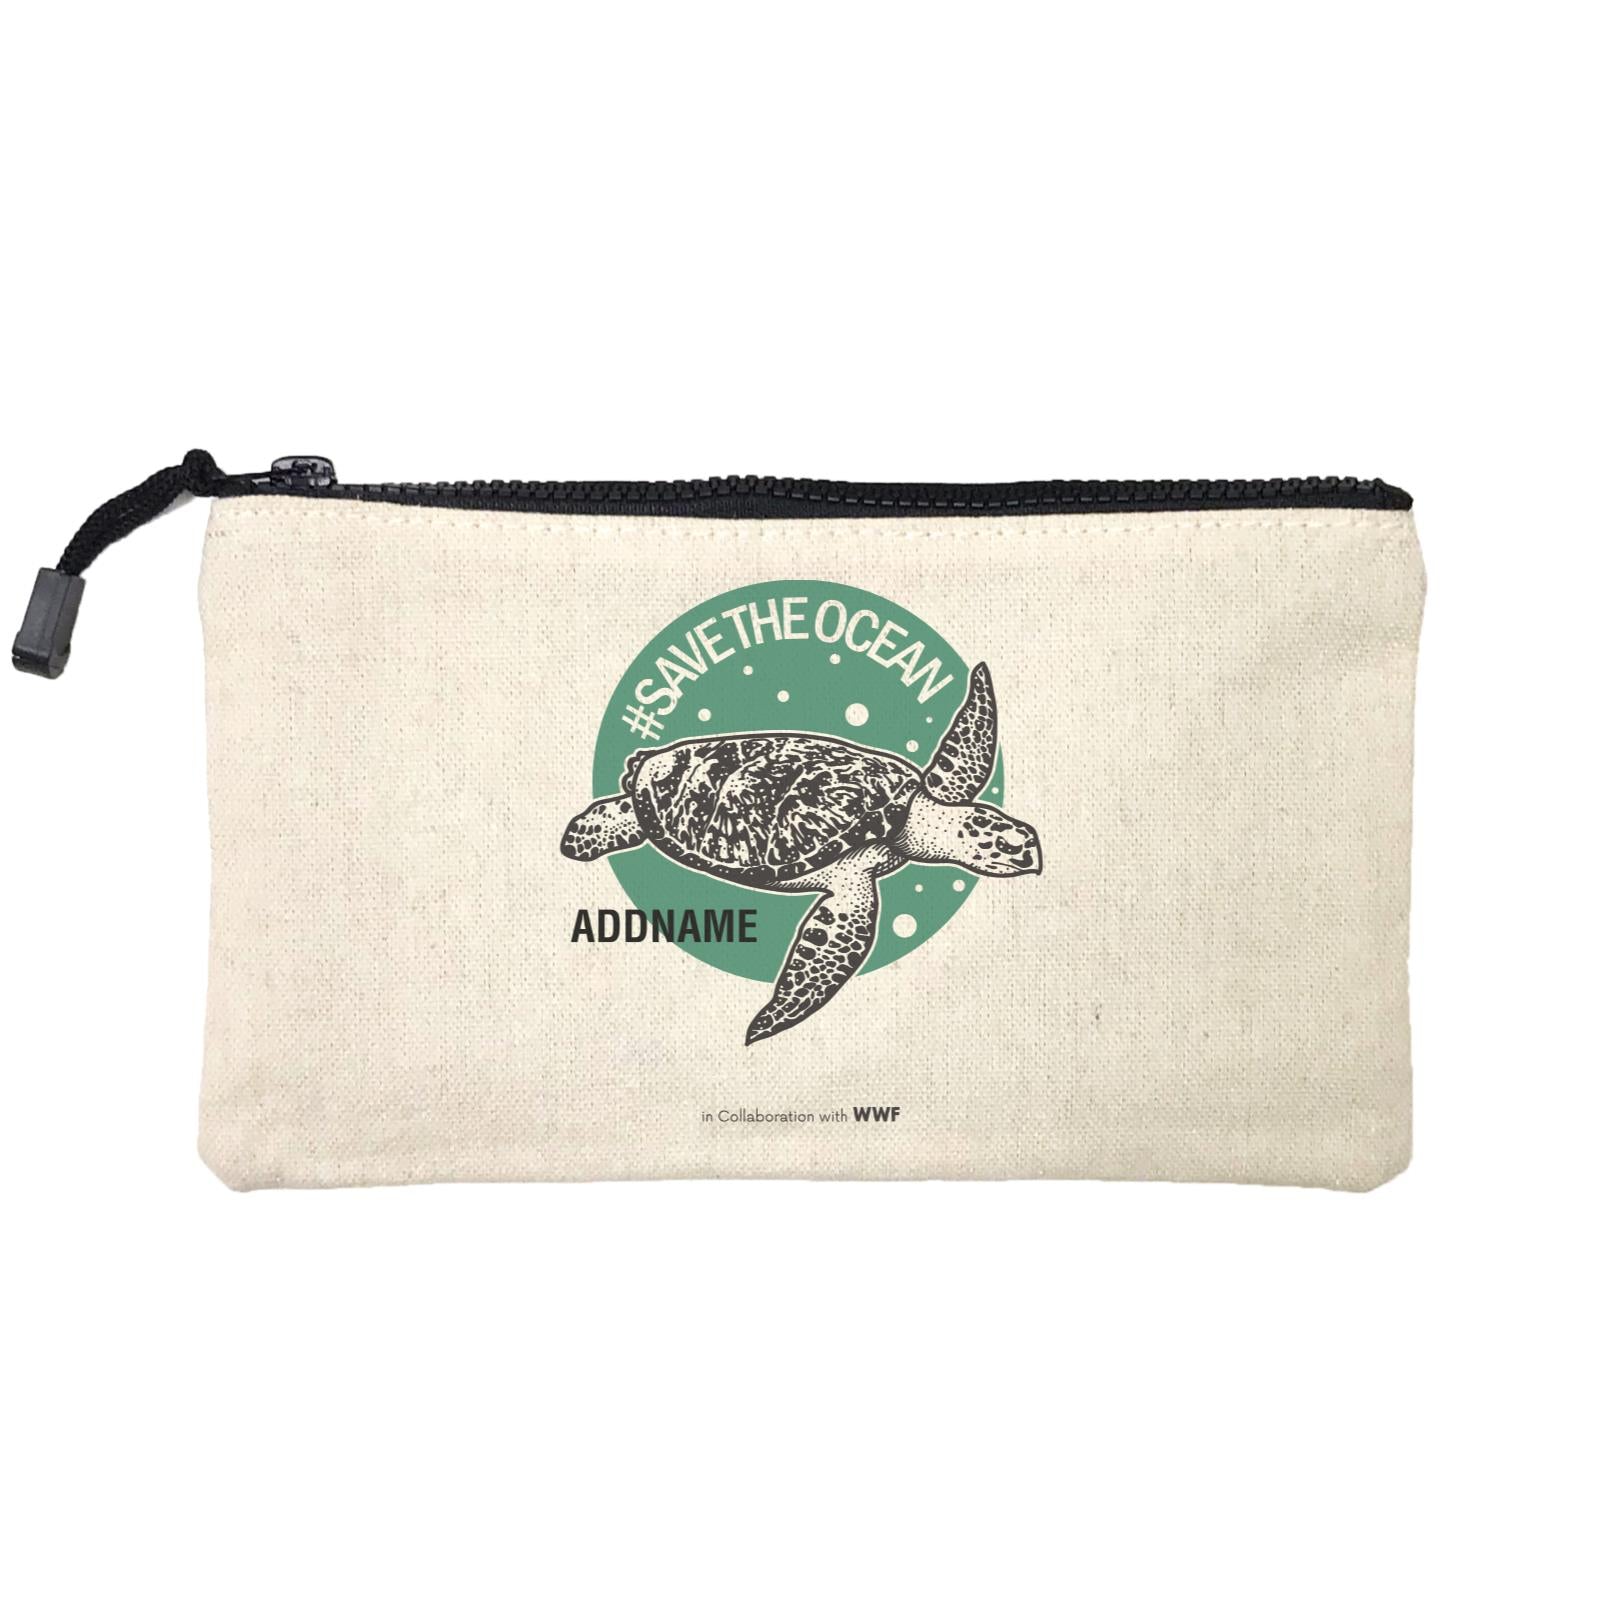 Hashtag Save the Ocean with Turtle Addname Mini Accessories Stationery Pouch